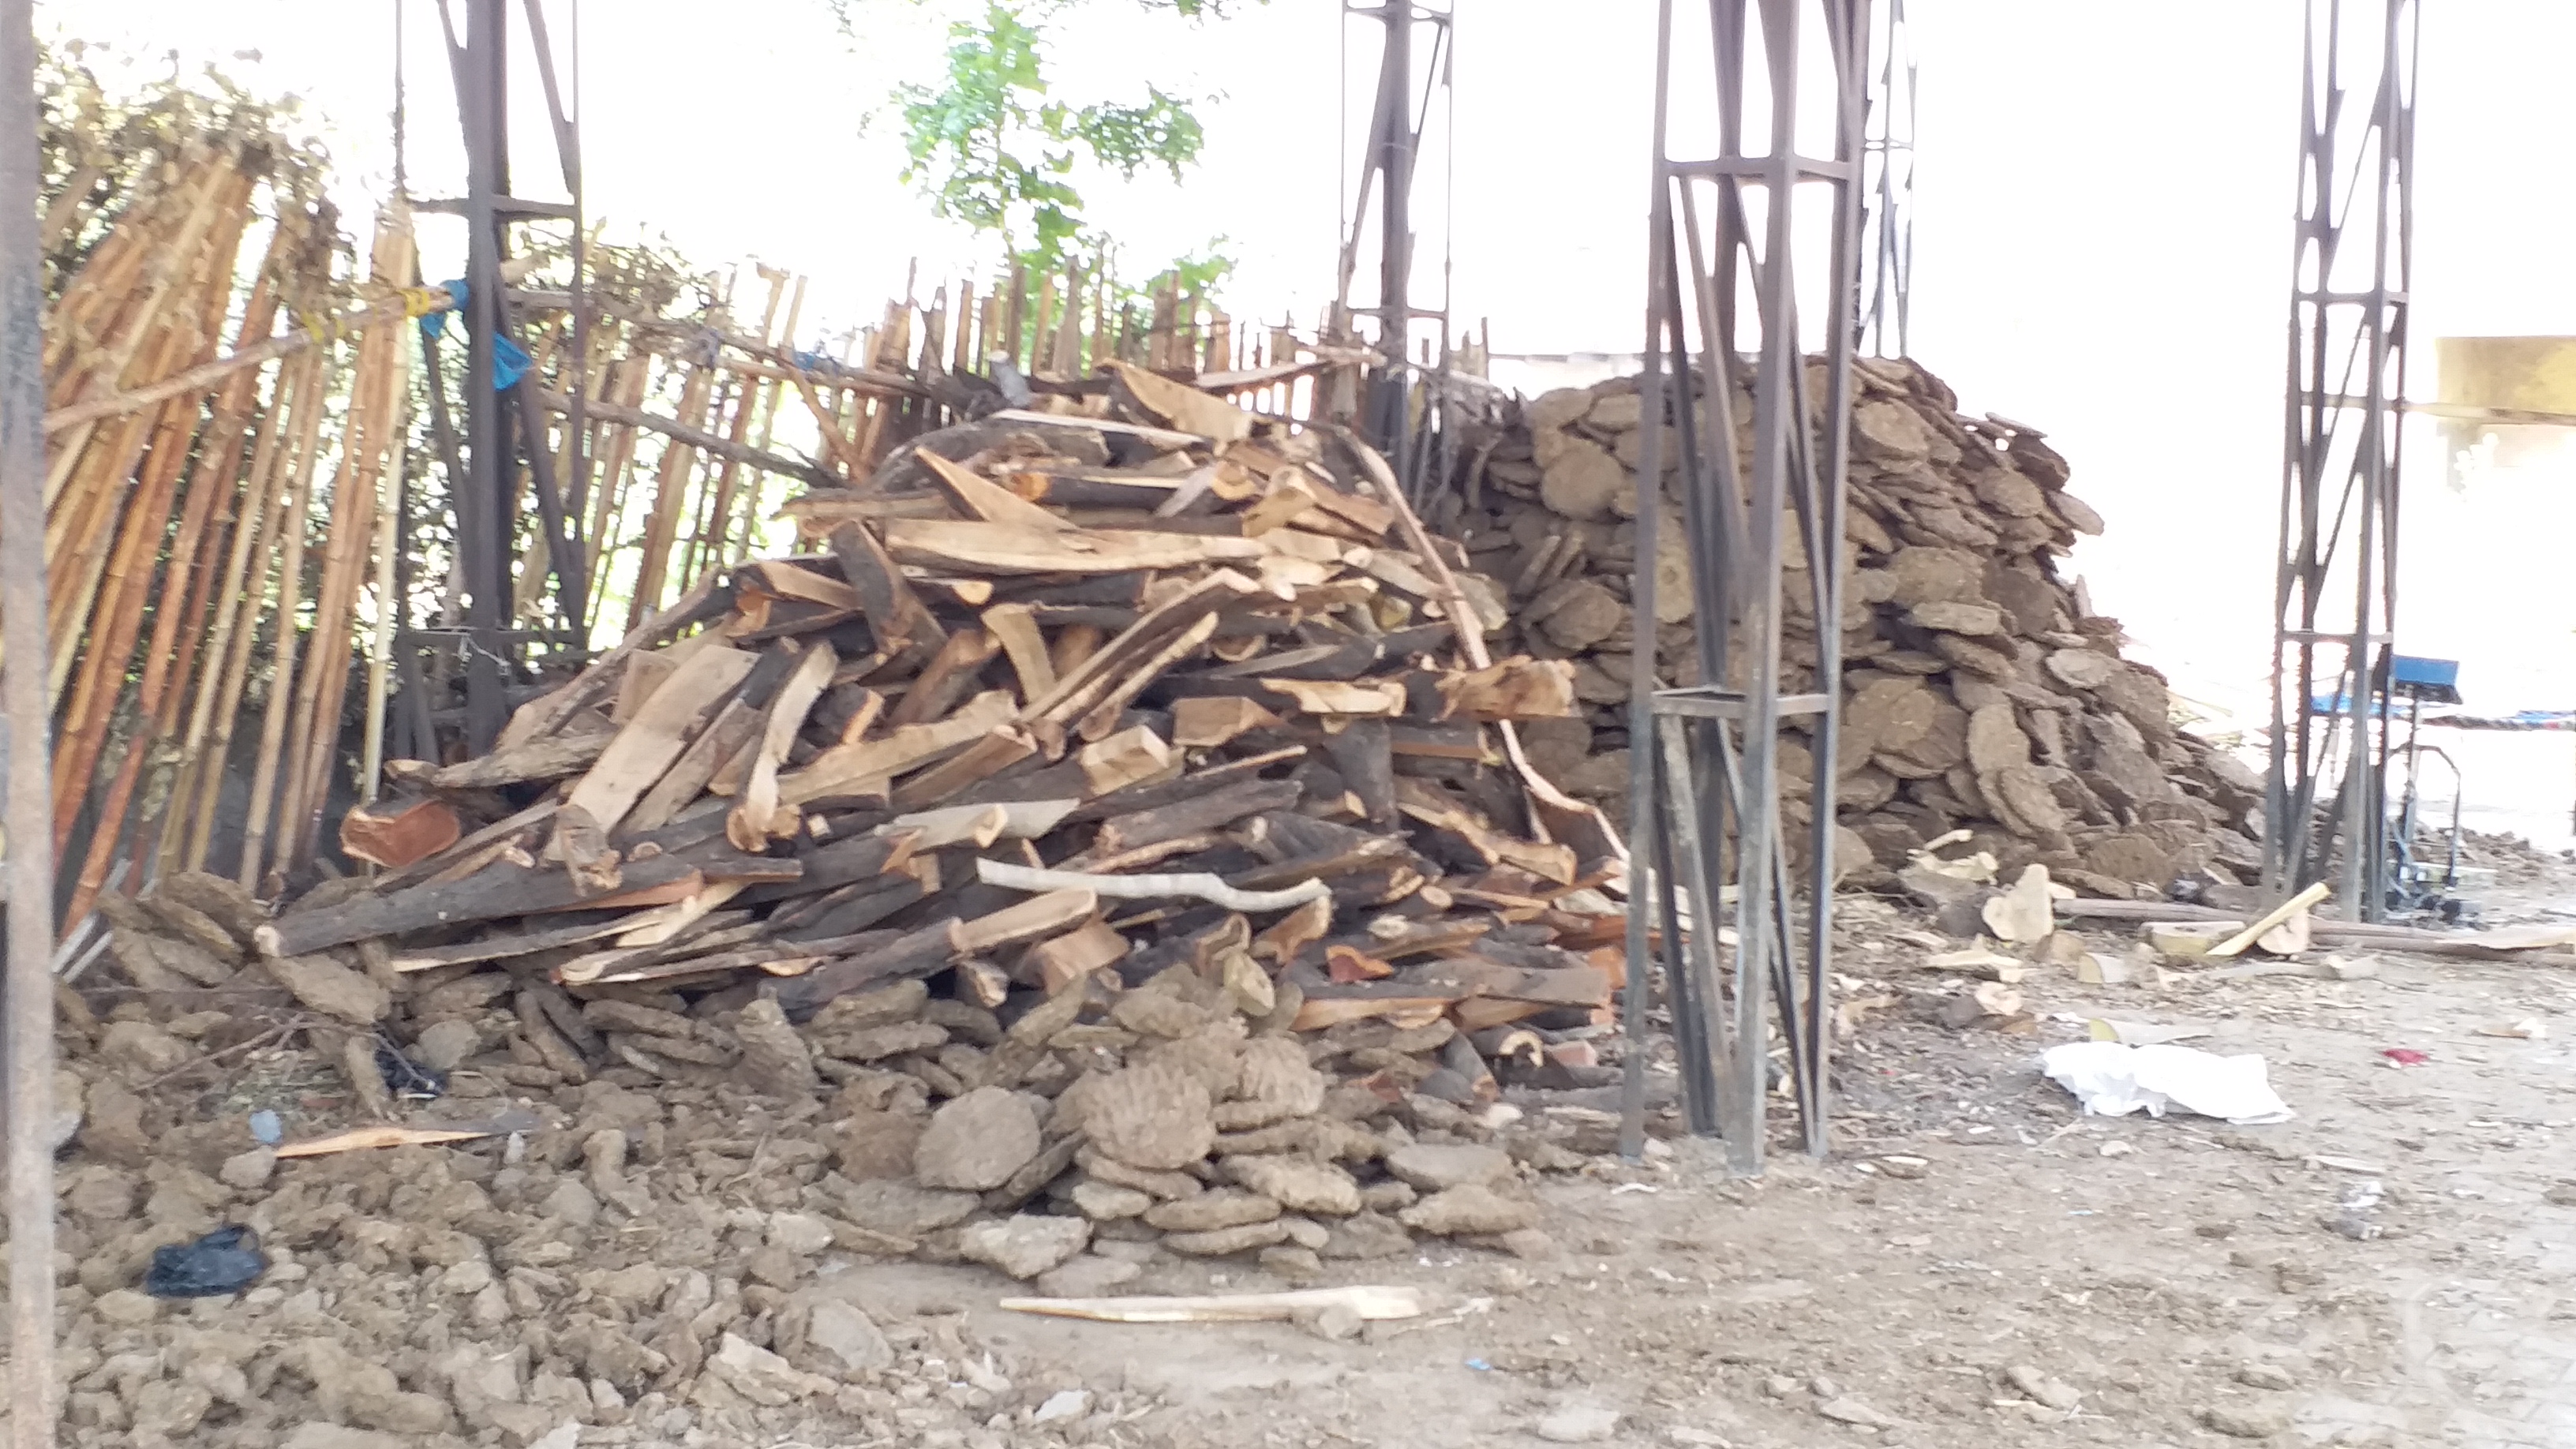 Prices of wood increased during the Corona period